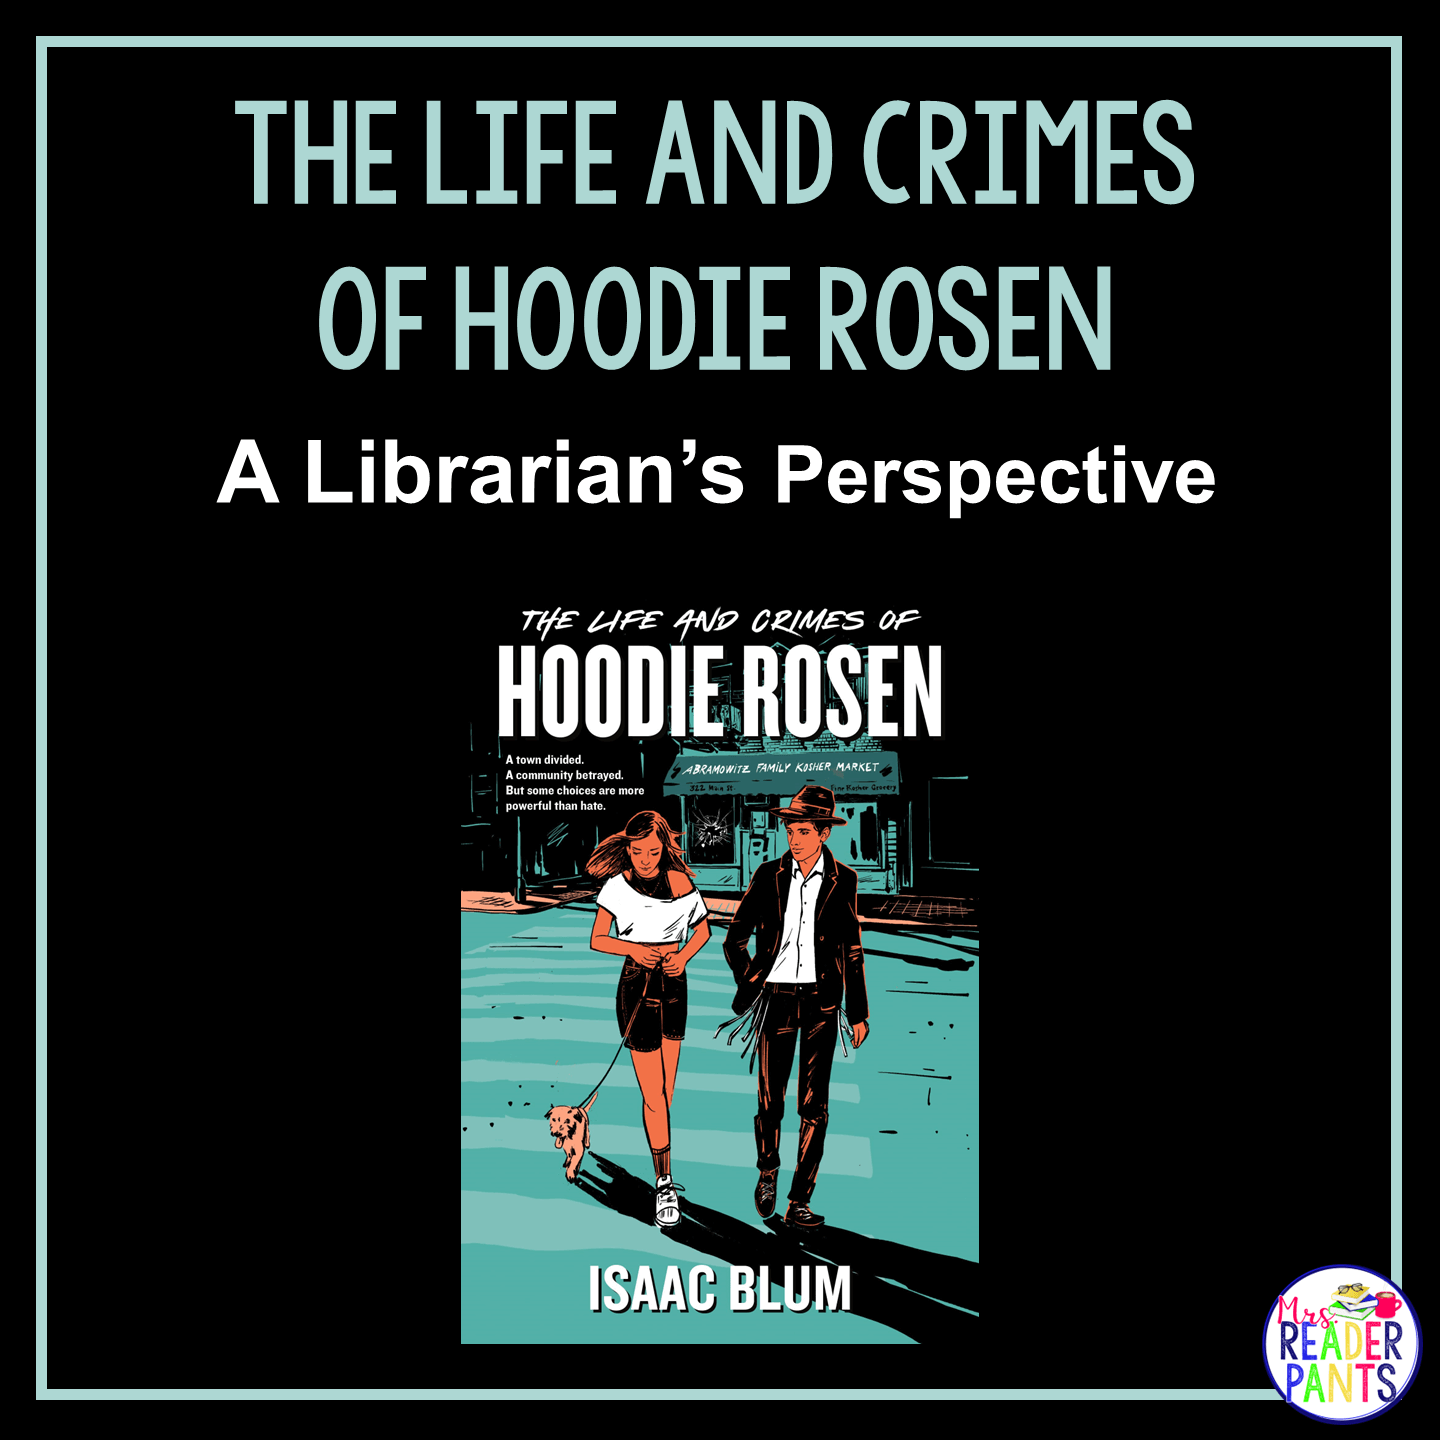 This is a Librarian's Perspective Review of The Life and Crimes of Hoodie Rosen by Isaac Blum.